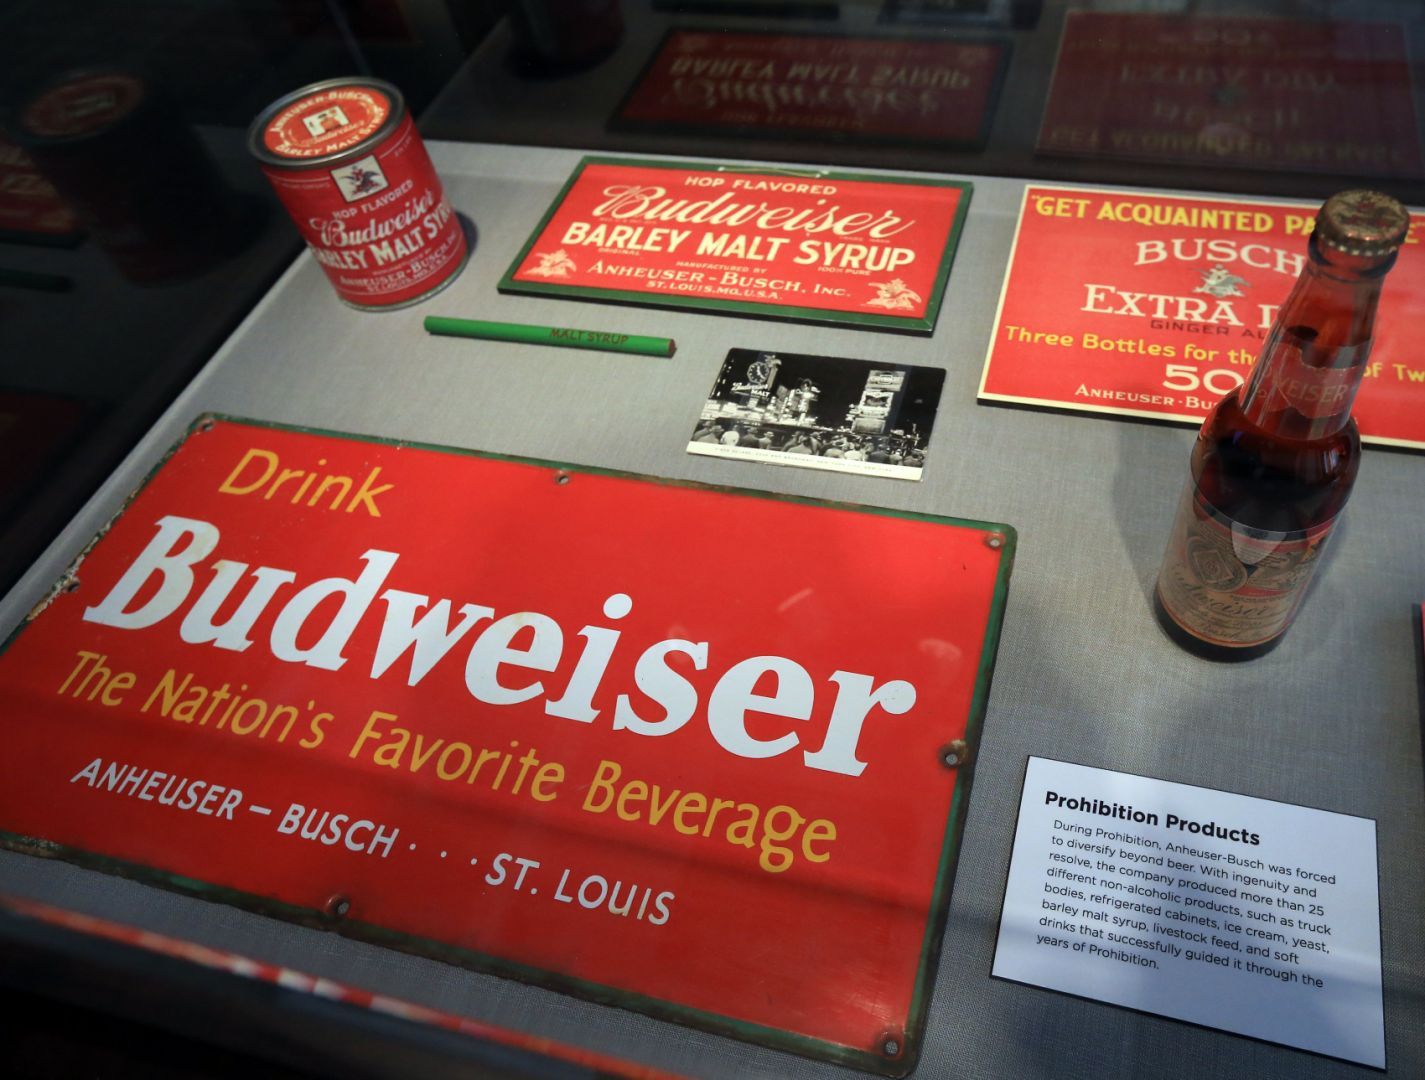 Prohibition Repeal Budweiser Beer PHOTO Prohibition Ends St Louis Brewery 